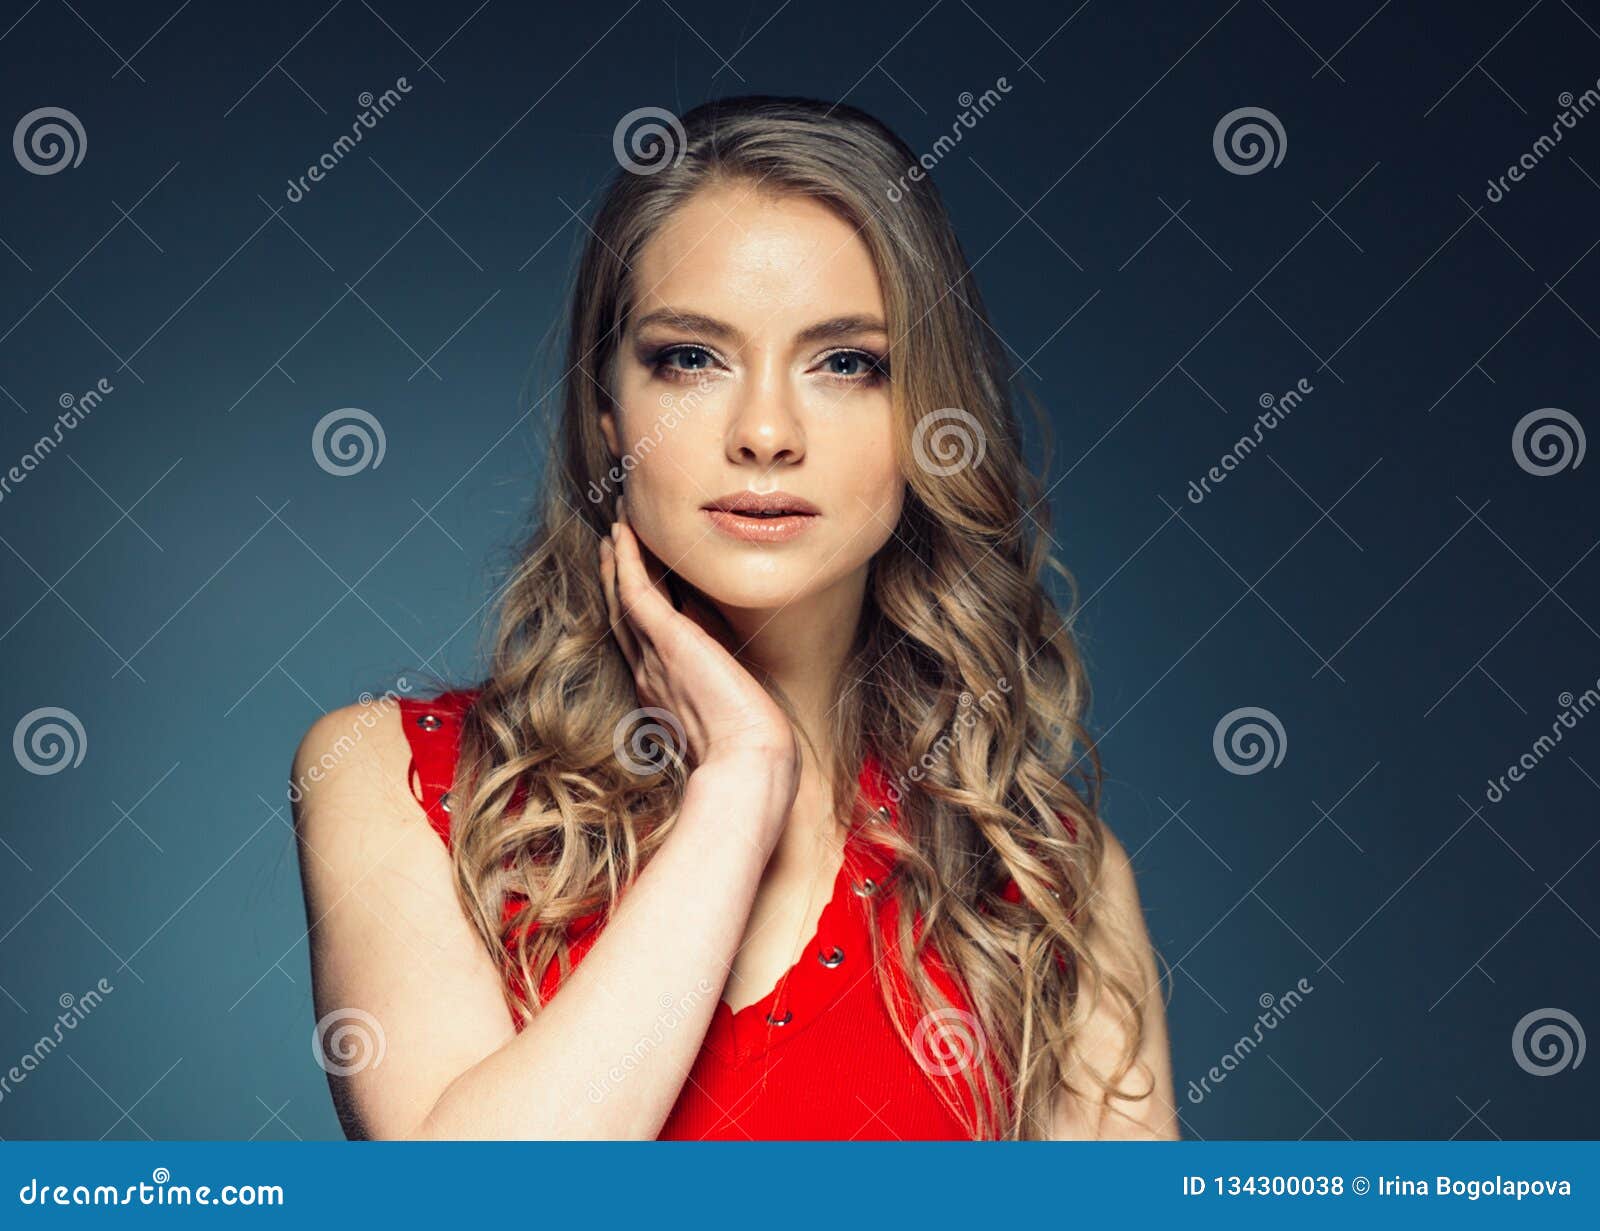 Woman in Red Dress with Long Blonde Hair Stock Photo - Image of girl ...